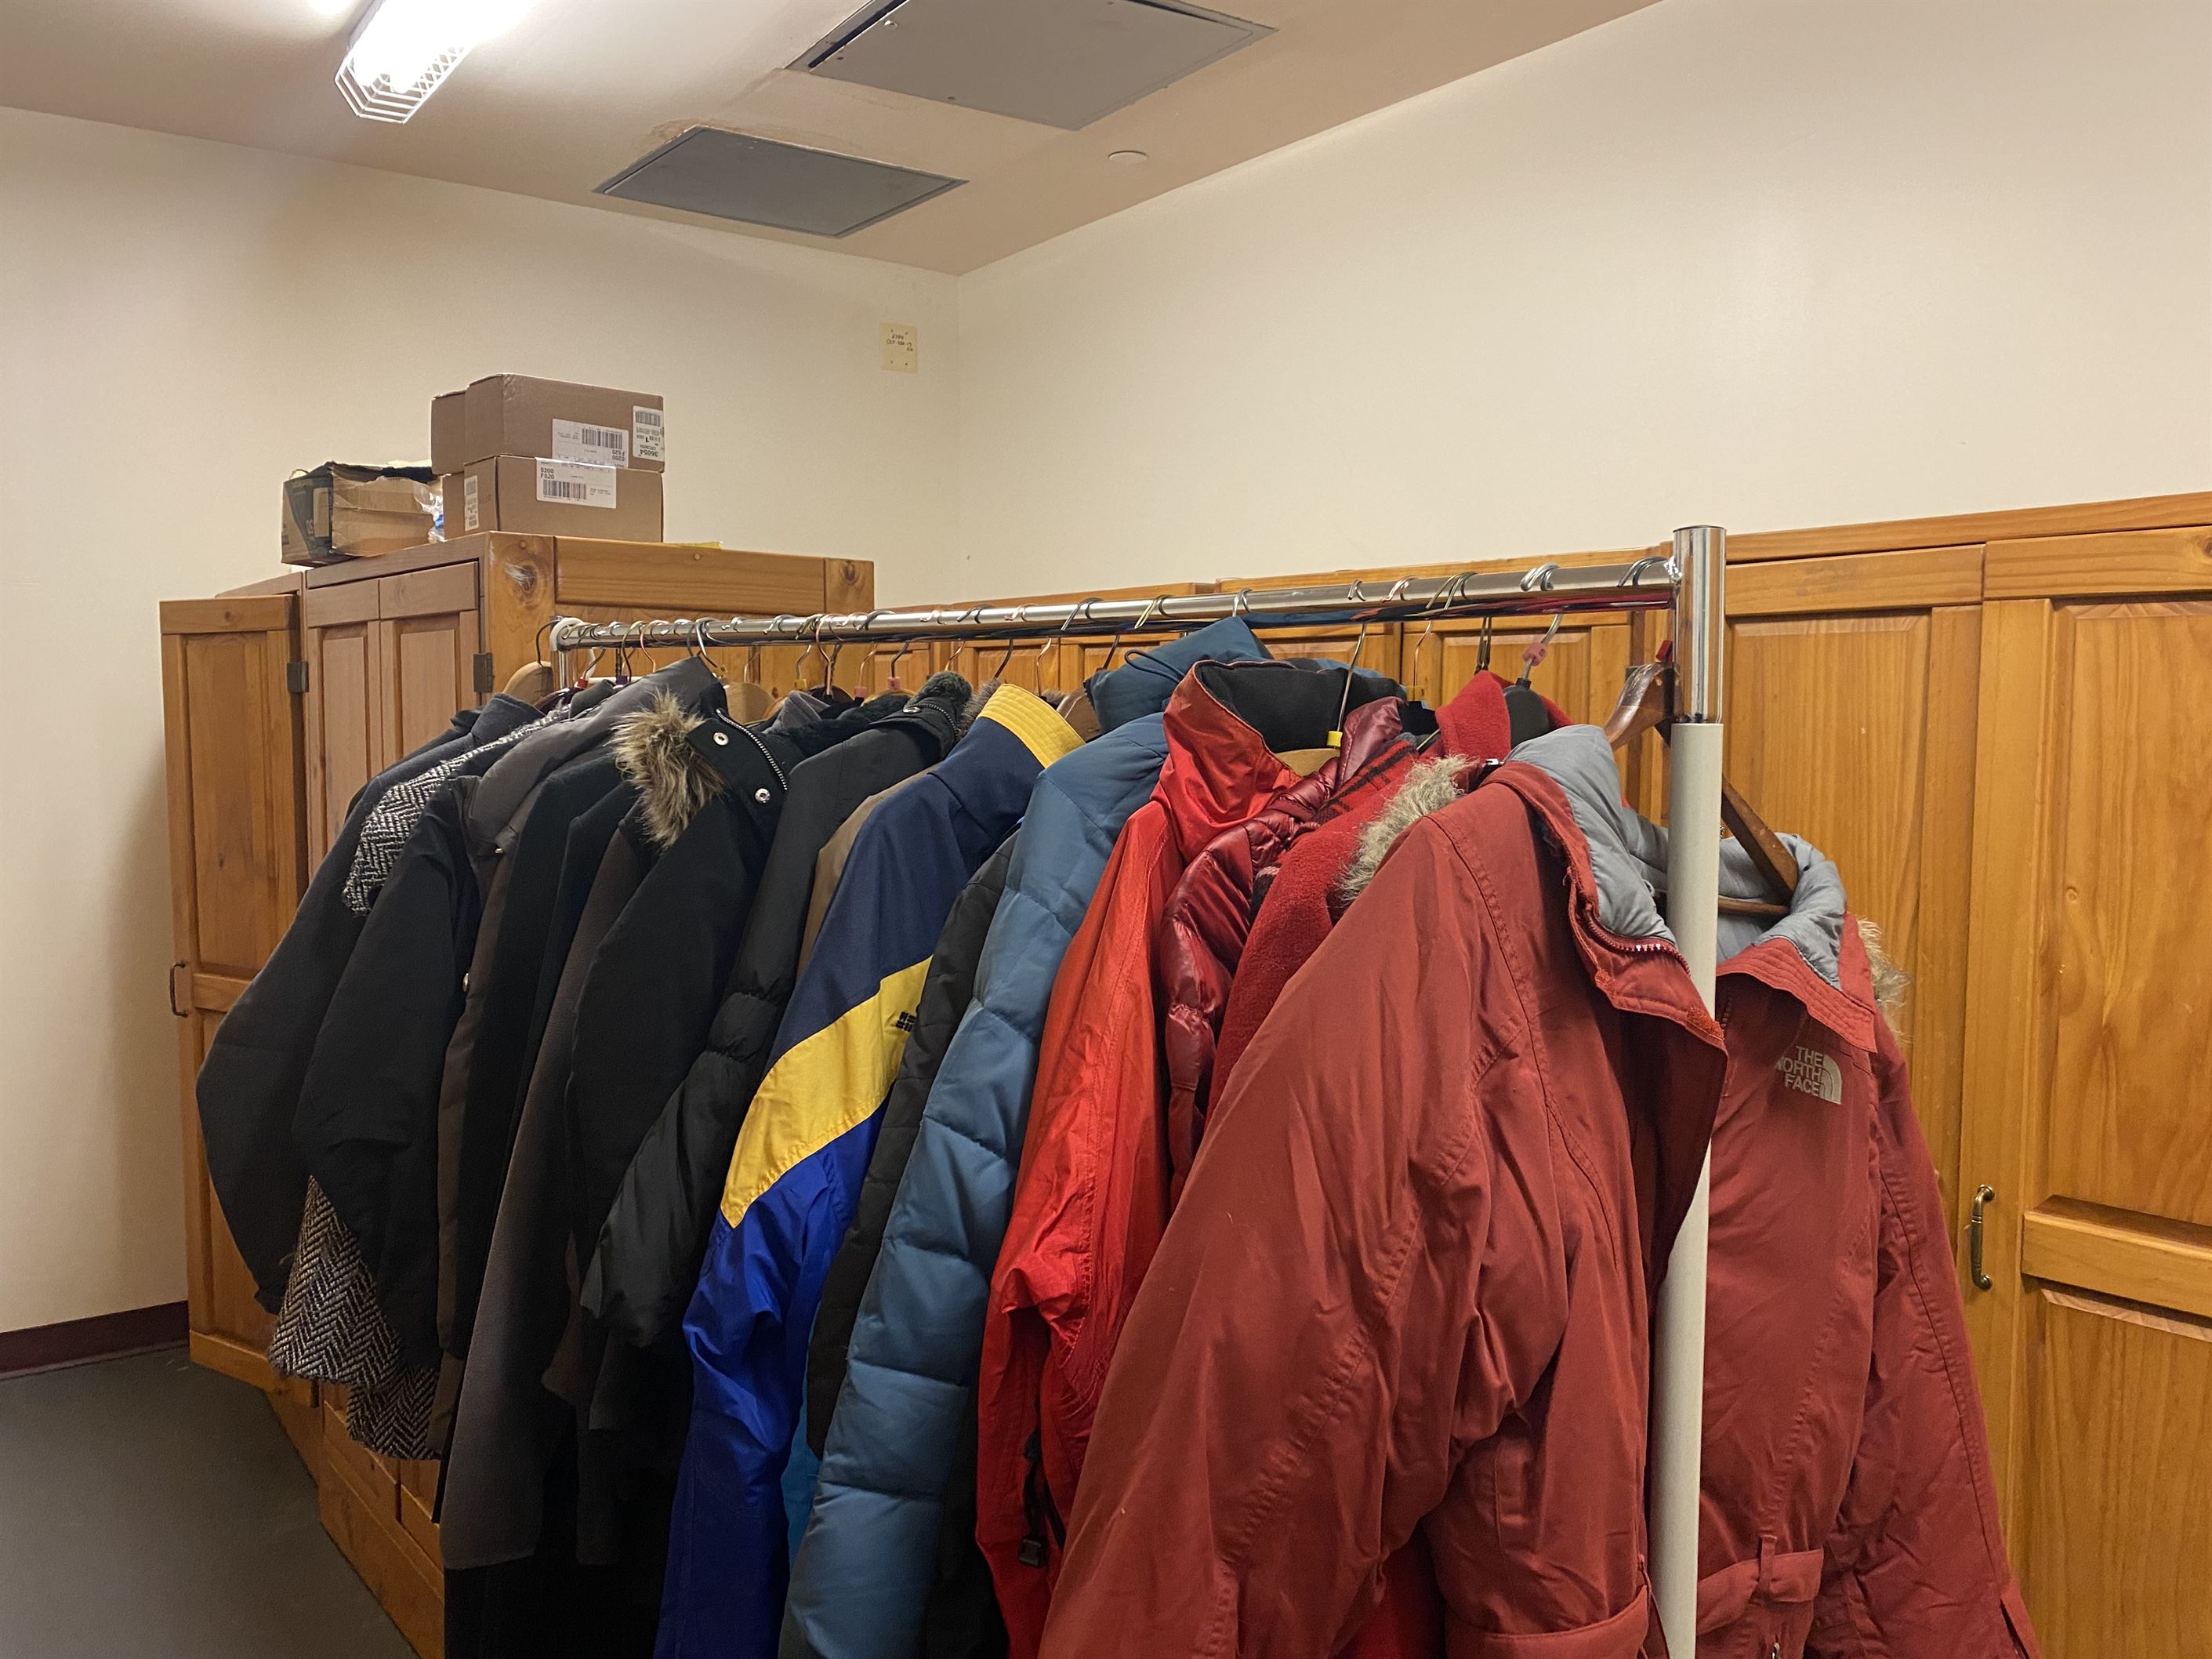 Housed inside Alice Paul Hall in The Village, Rocky's Closet is available for students on Wednesday, Thursday and Friday.
Crystal Durham | The Montclarion